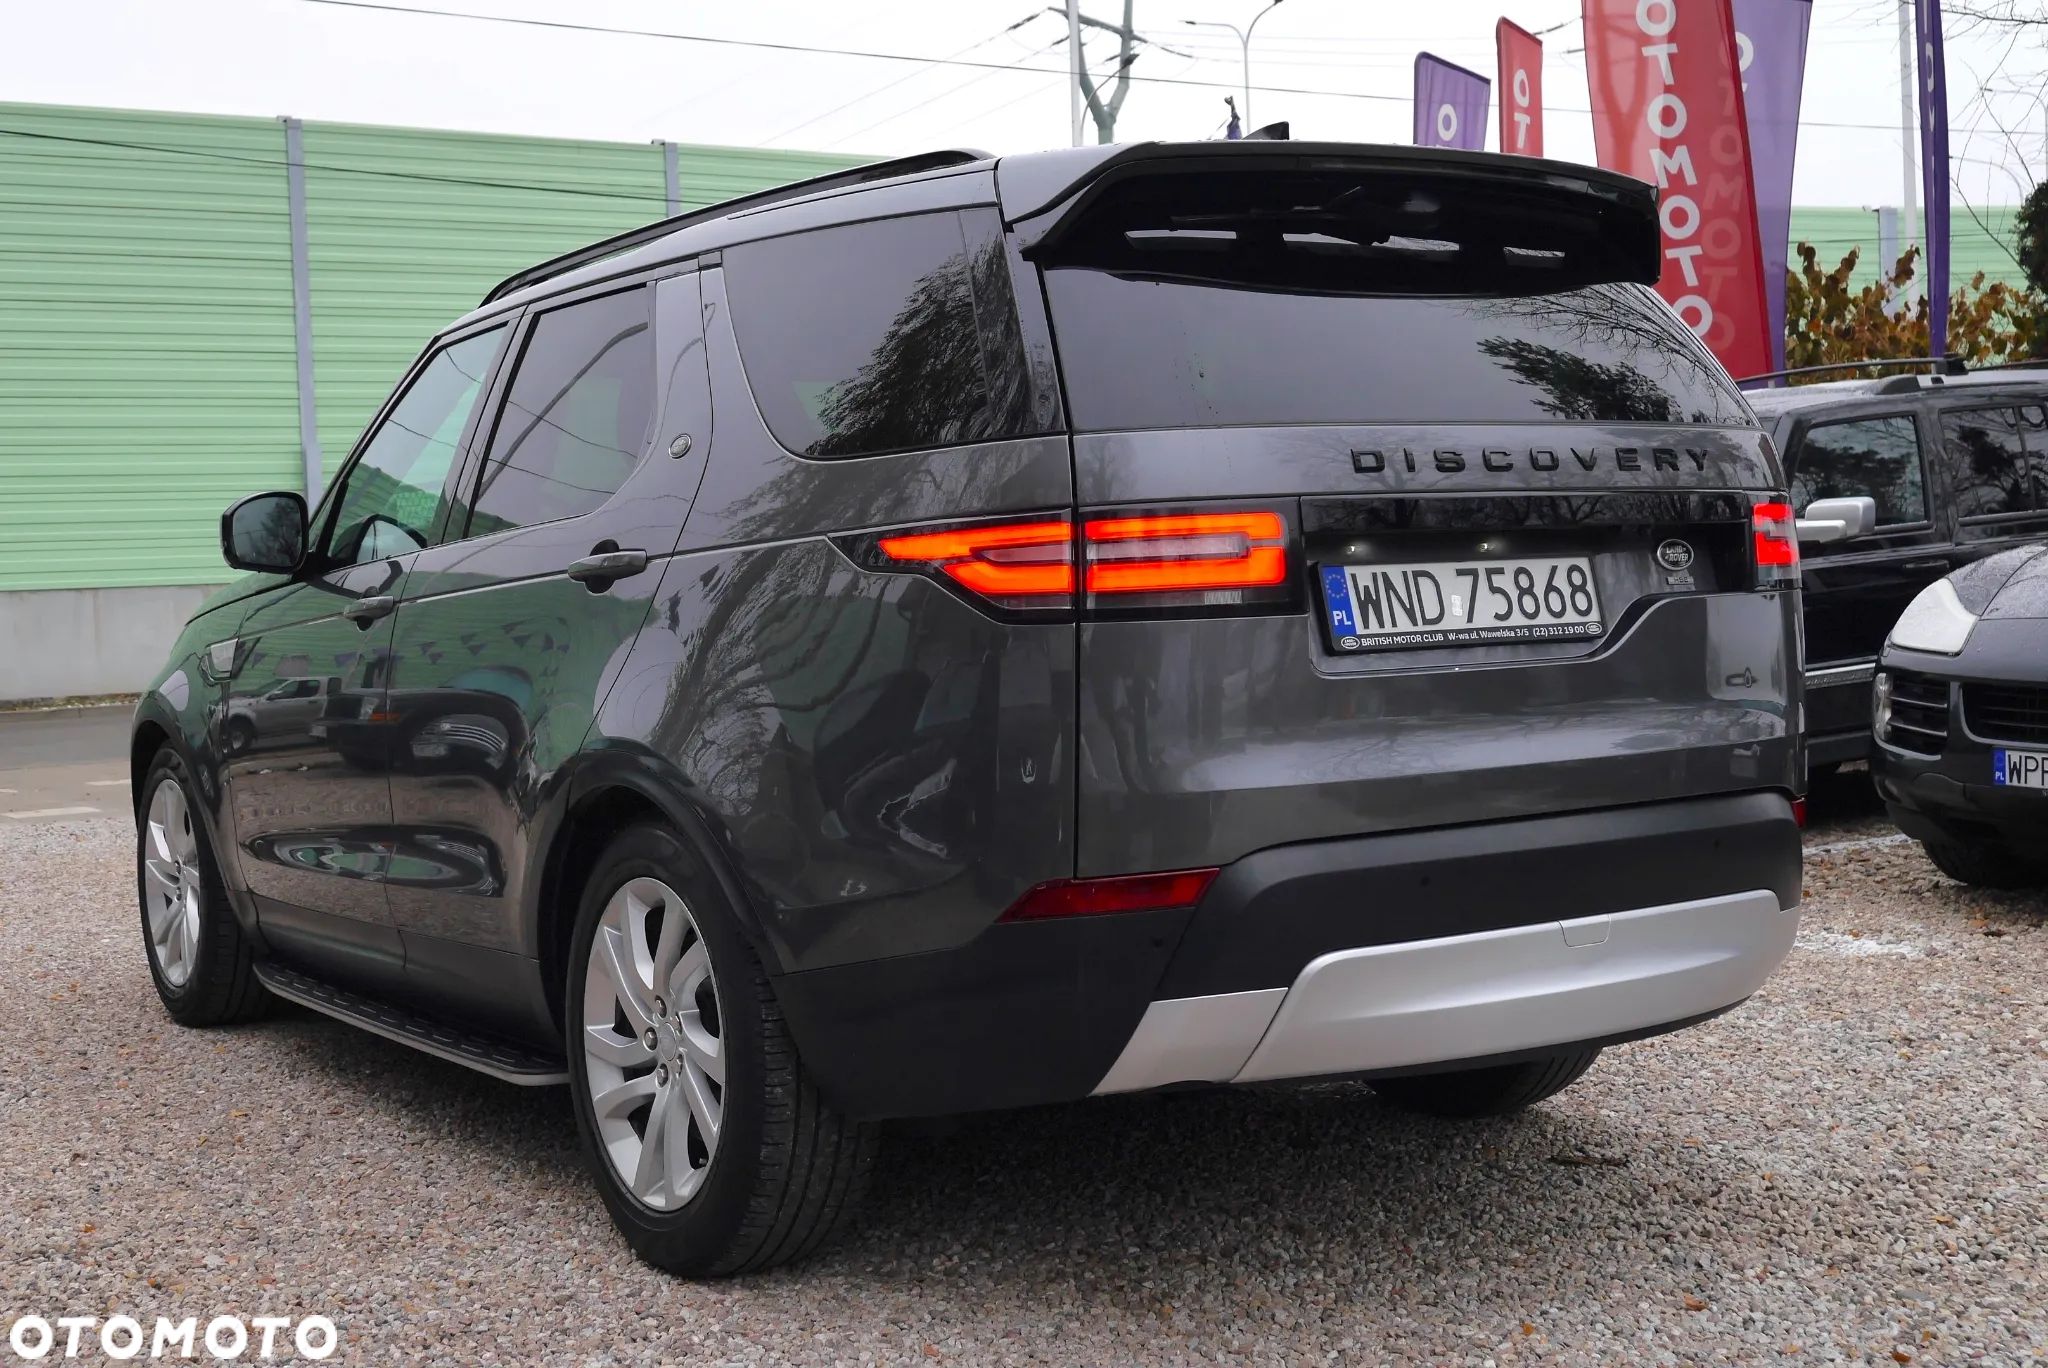 Land Rover Discovery V 2.0 SD4 HSE Luxury - 4